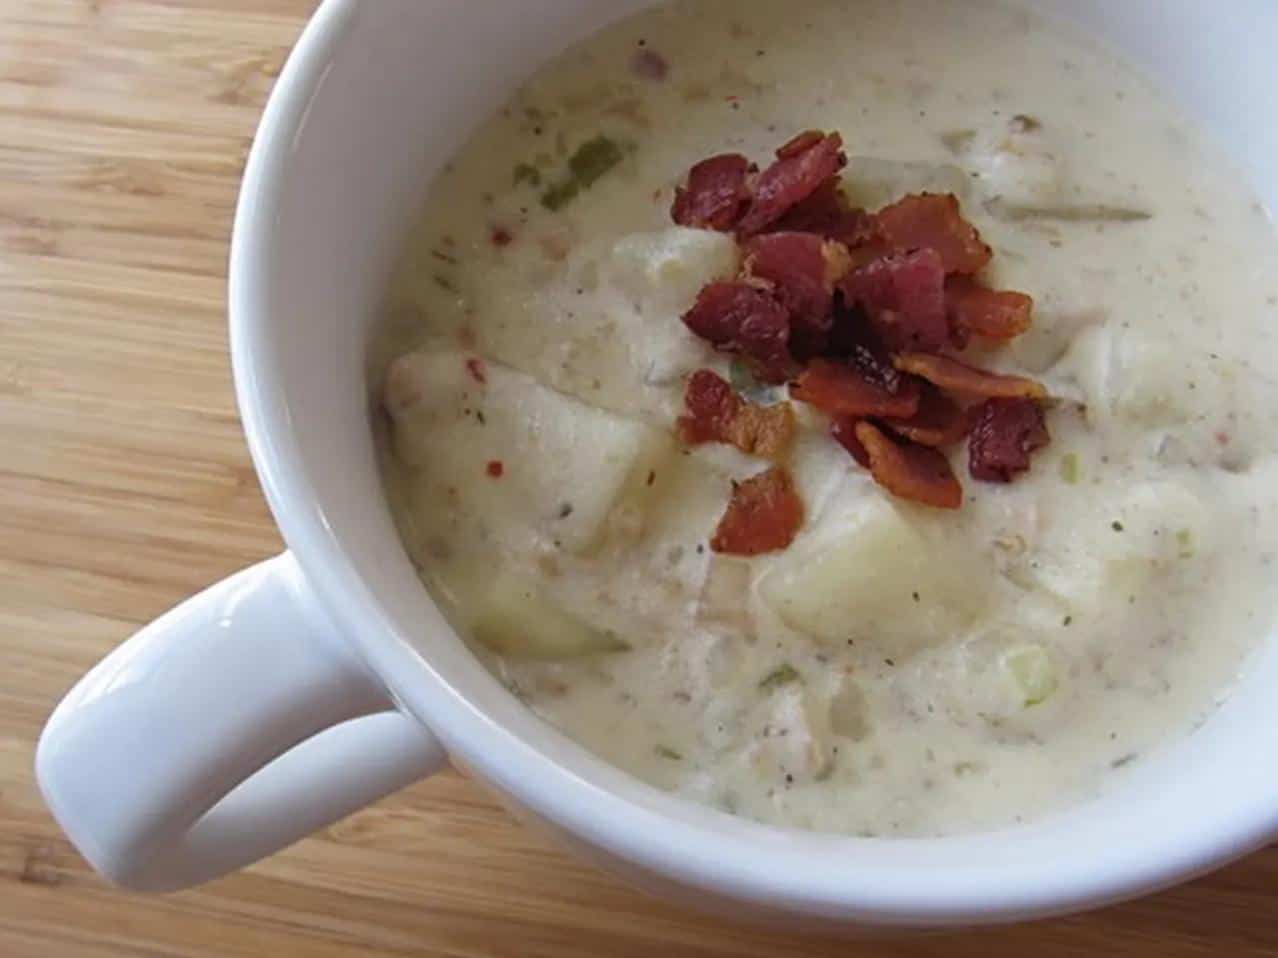  This Cheater's Clam Chowder is so delicious that no one will ever suspect it's a